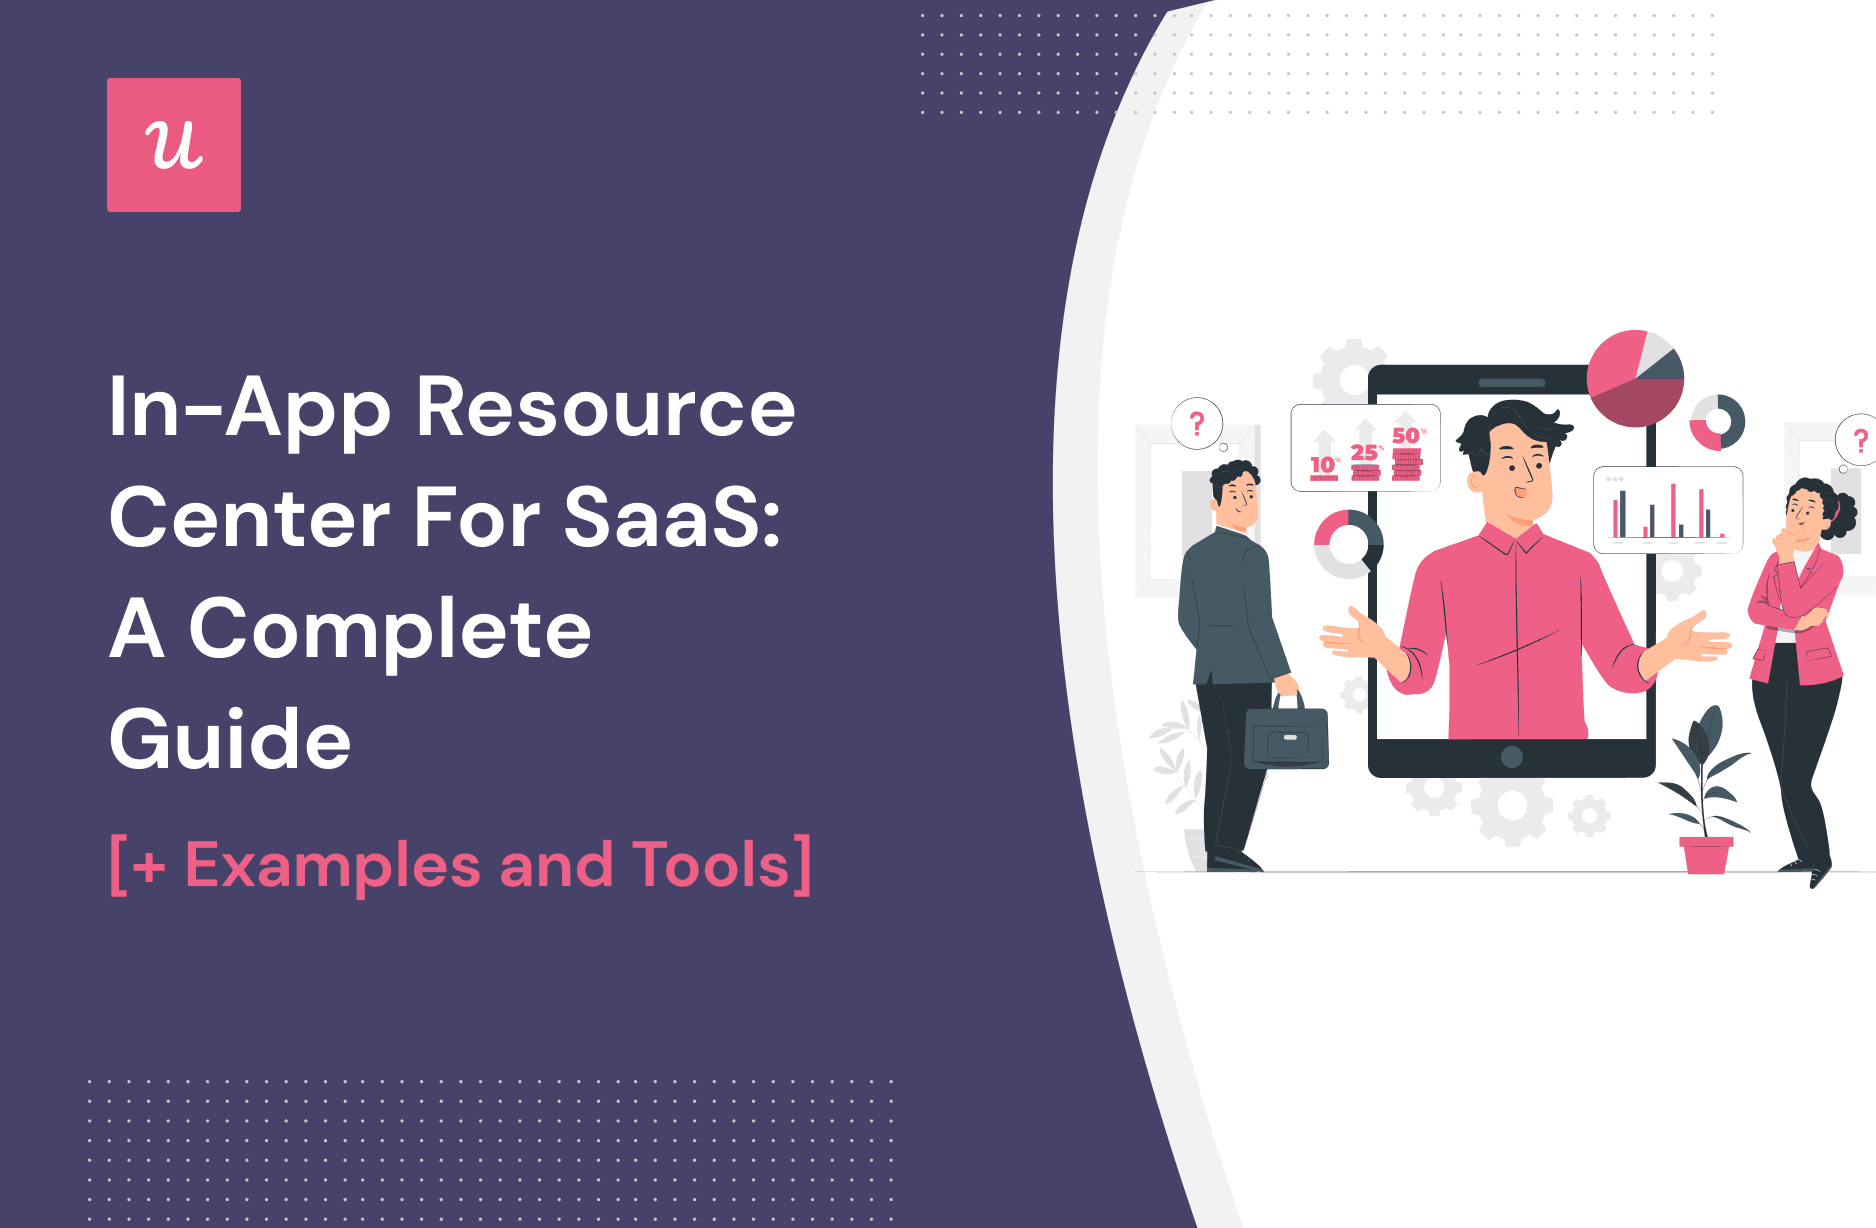 in-app resource center for saas